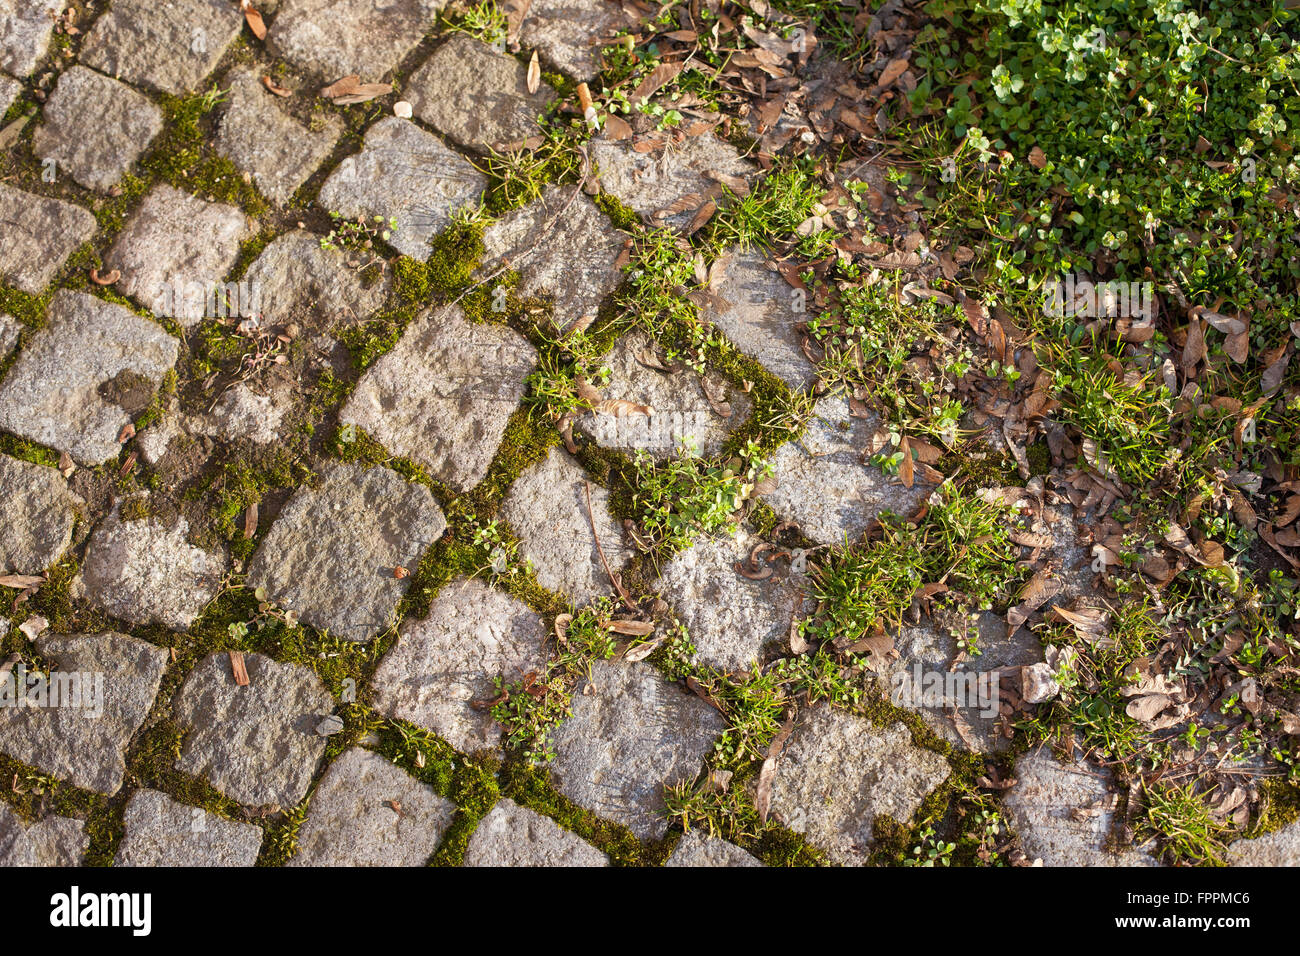 Cobblestones walkway with moss and grass growing in the cracks Stock Photo